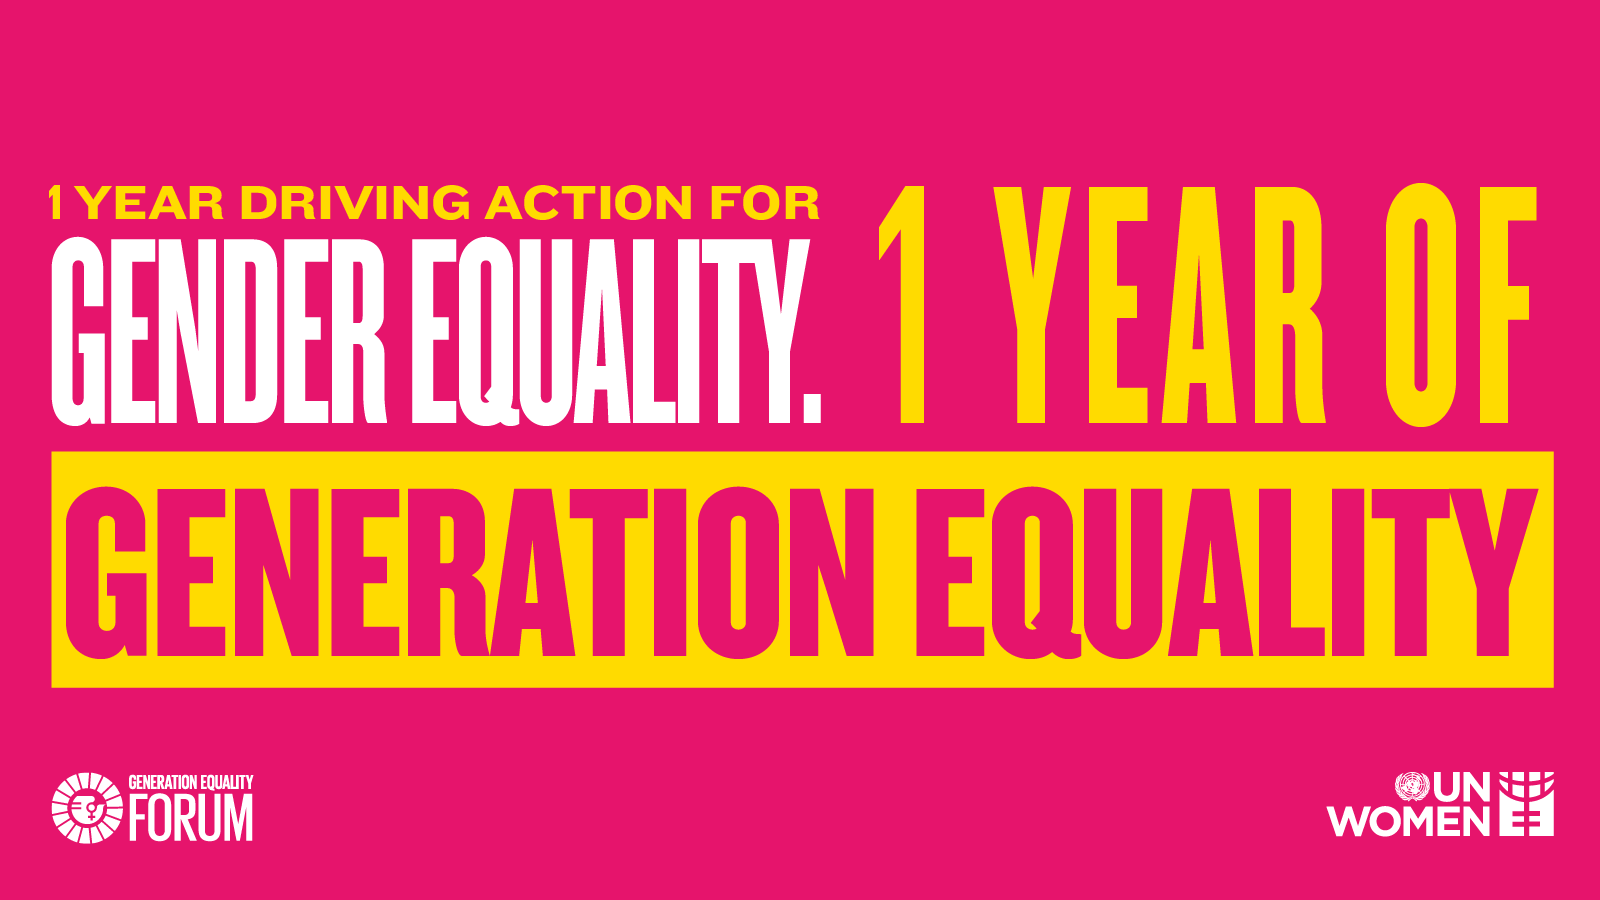 One year driving action for gender equality. One year of Generation Equality.